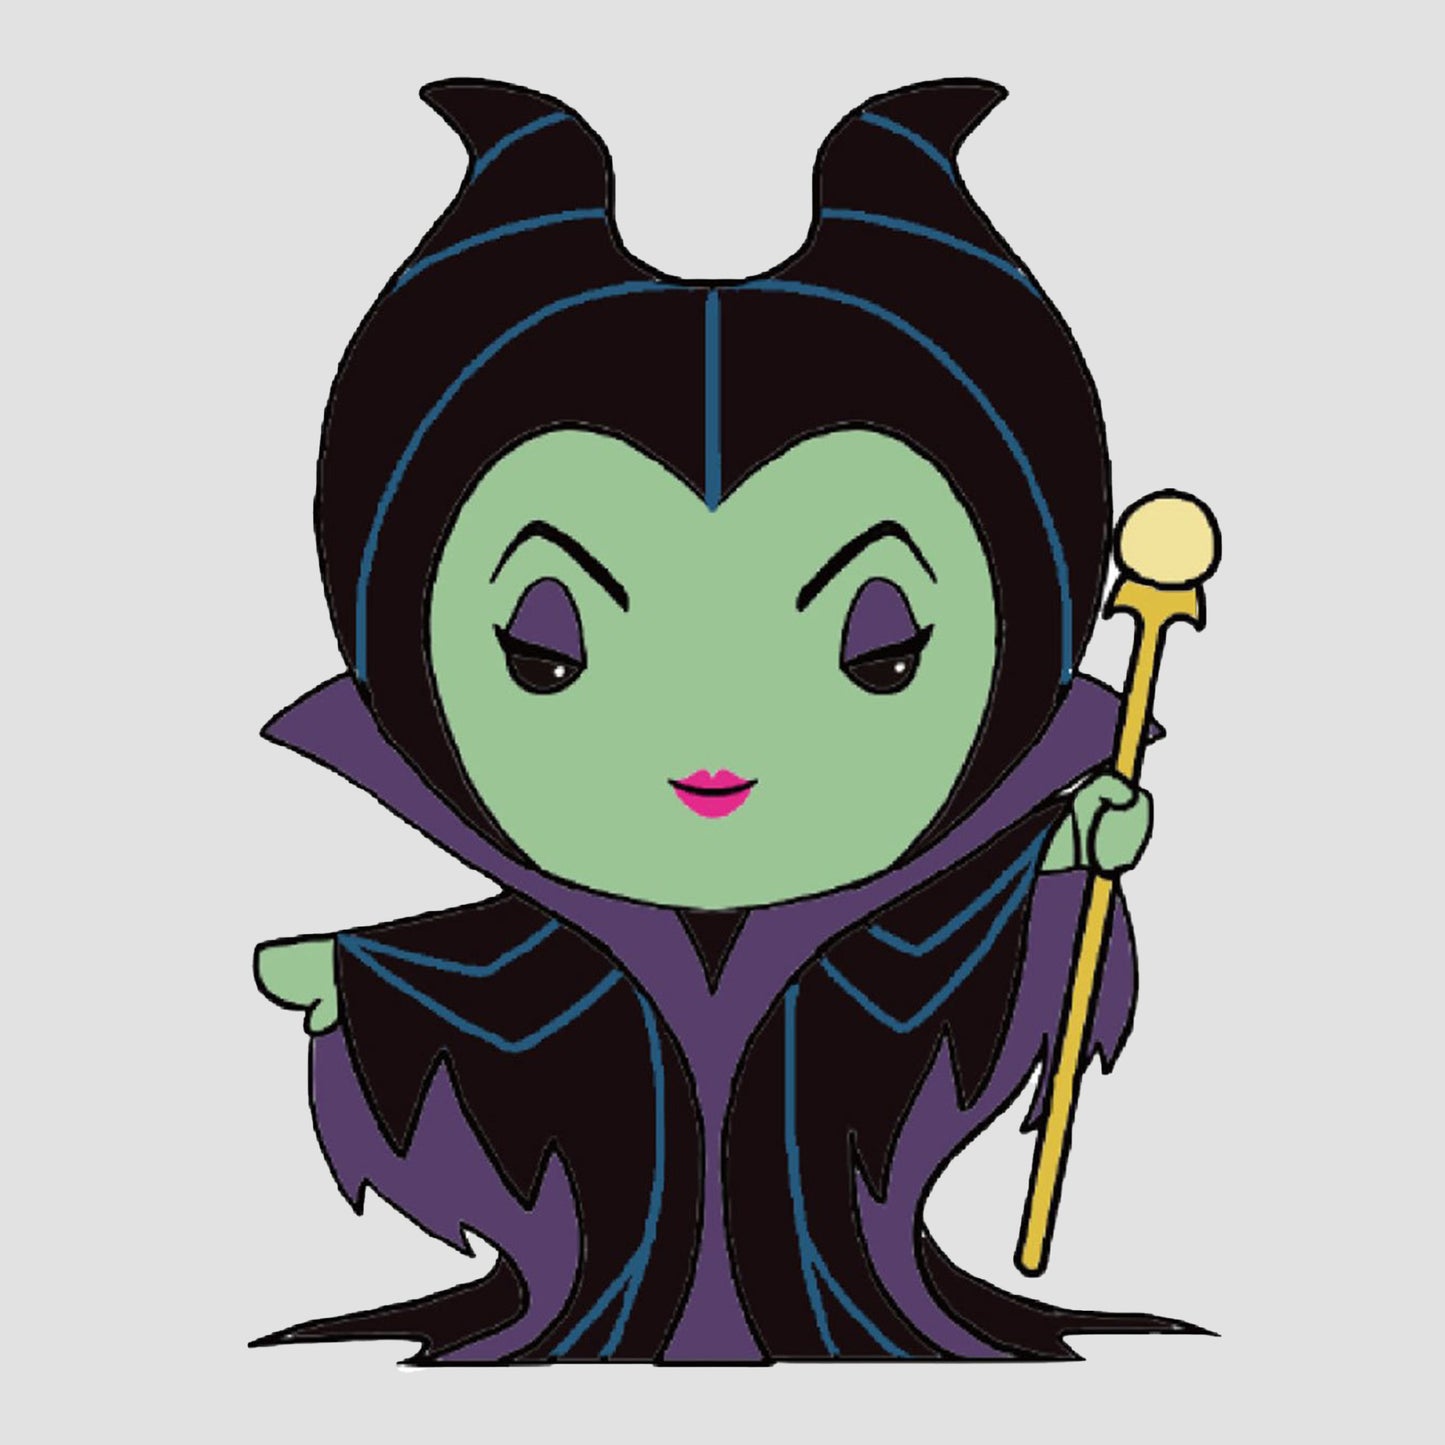 Maleficent Face 8x8 Cartoon Villain Quilters and Craft Cotton Fabric Block  Panel | eBay